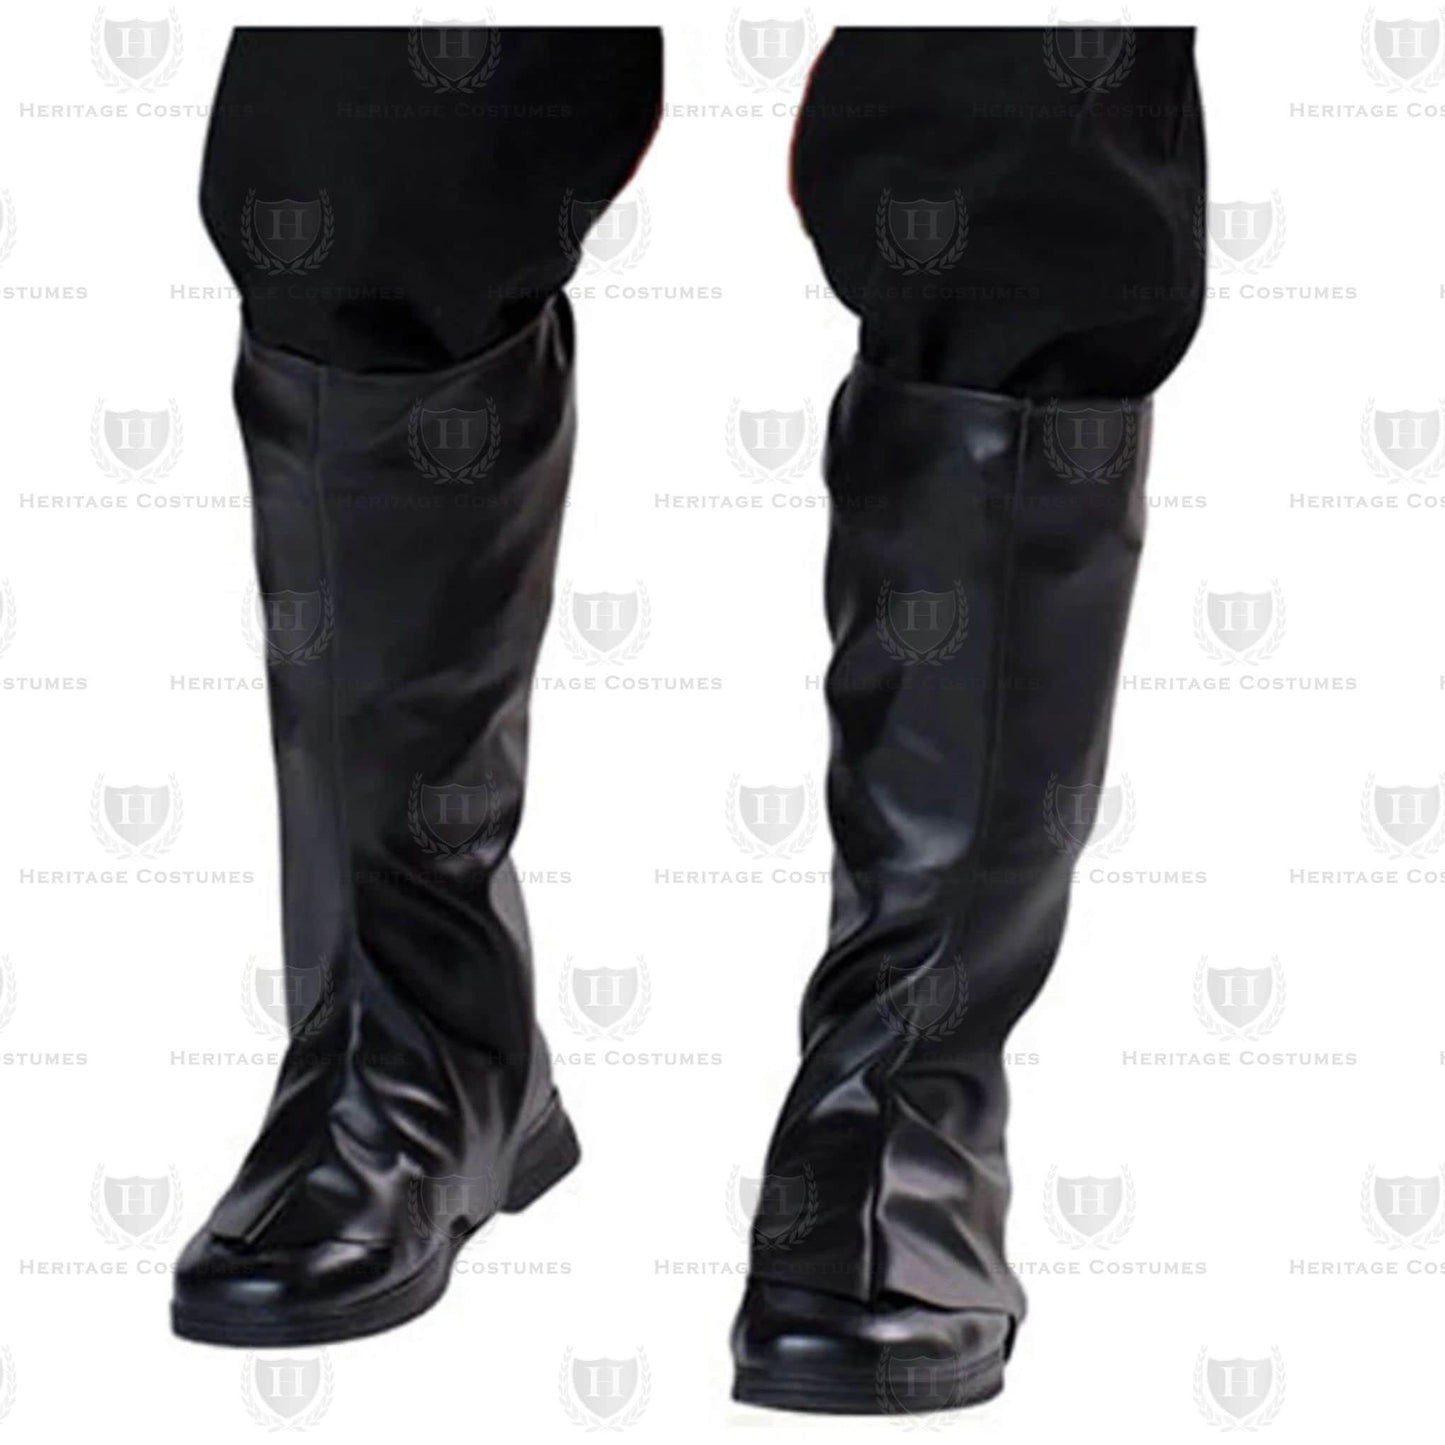 Boot Covers, Boot Spats